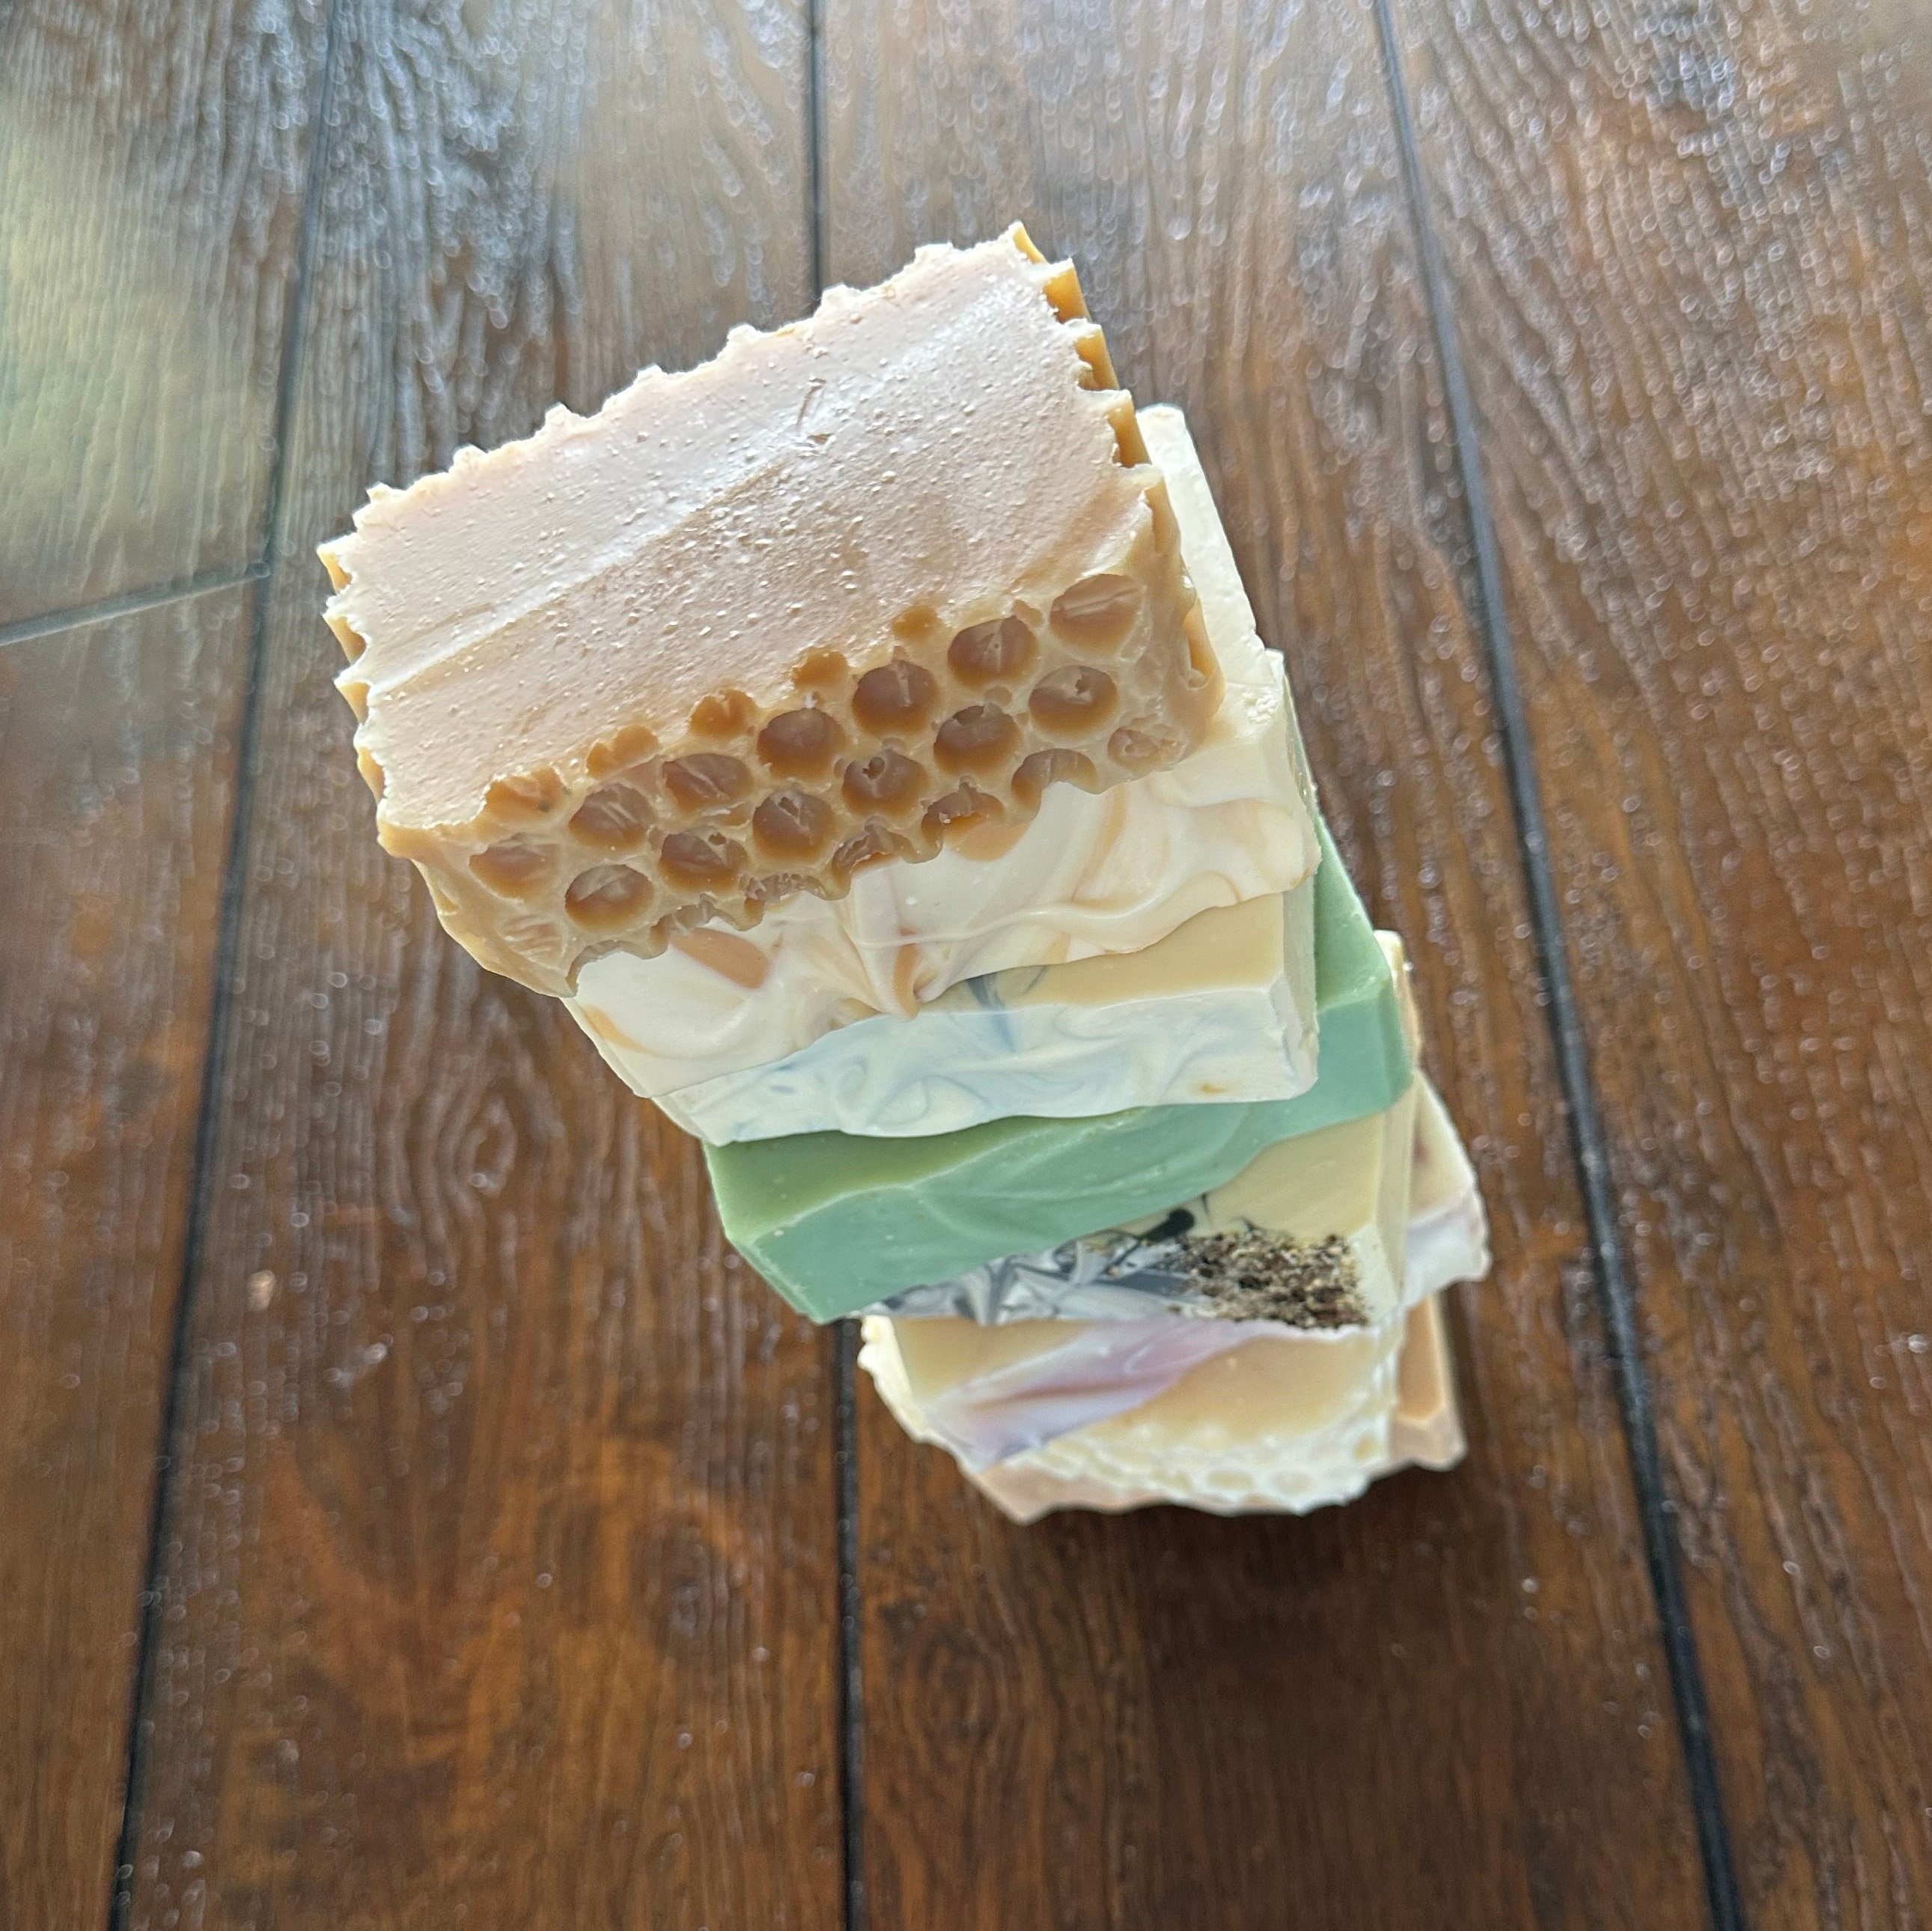 ON SALE: Buy in Bulk 25 Natural Soap Bars by Cold Process With Pure  Essential Oils, Mango Butter & More Made From Scratch Rich Scents 